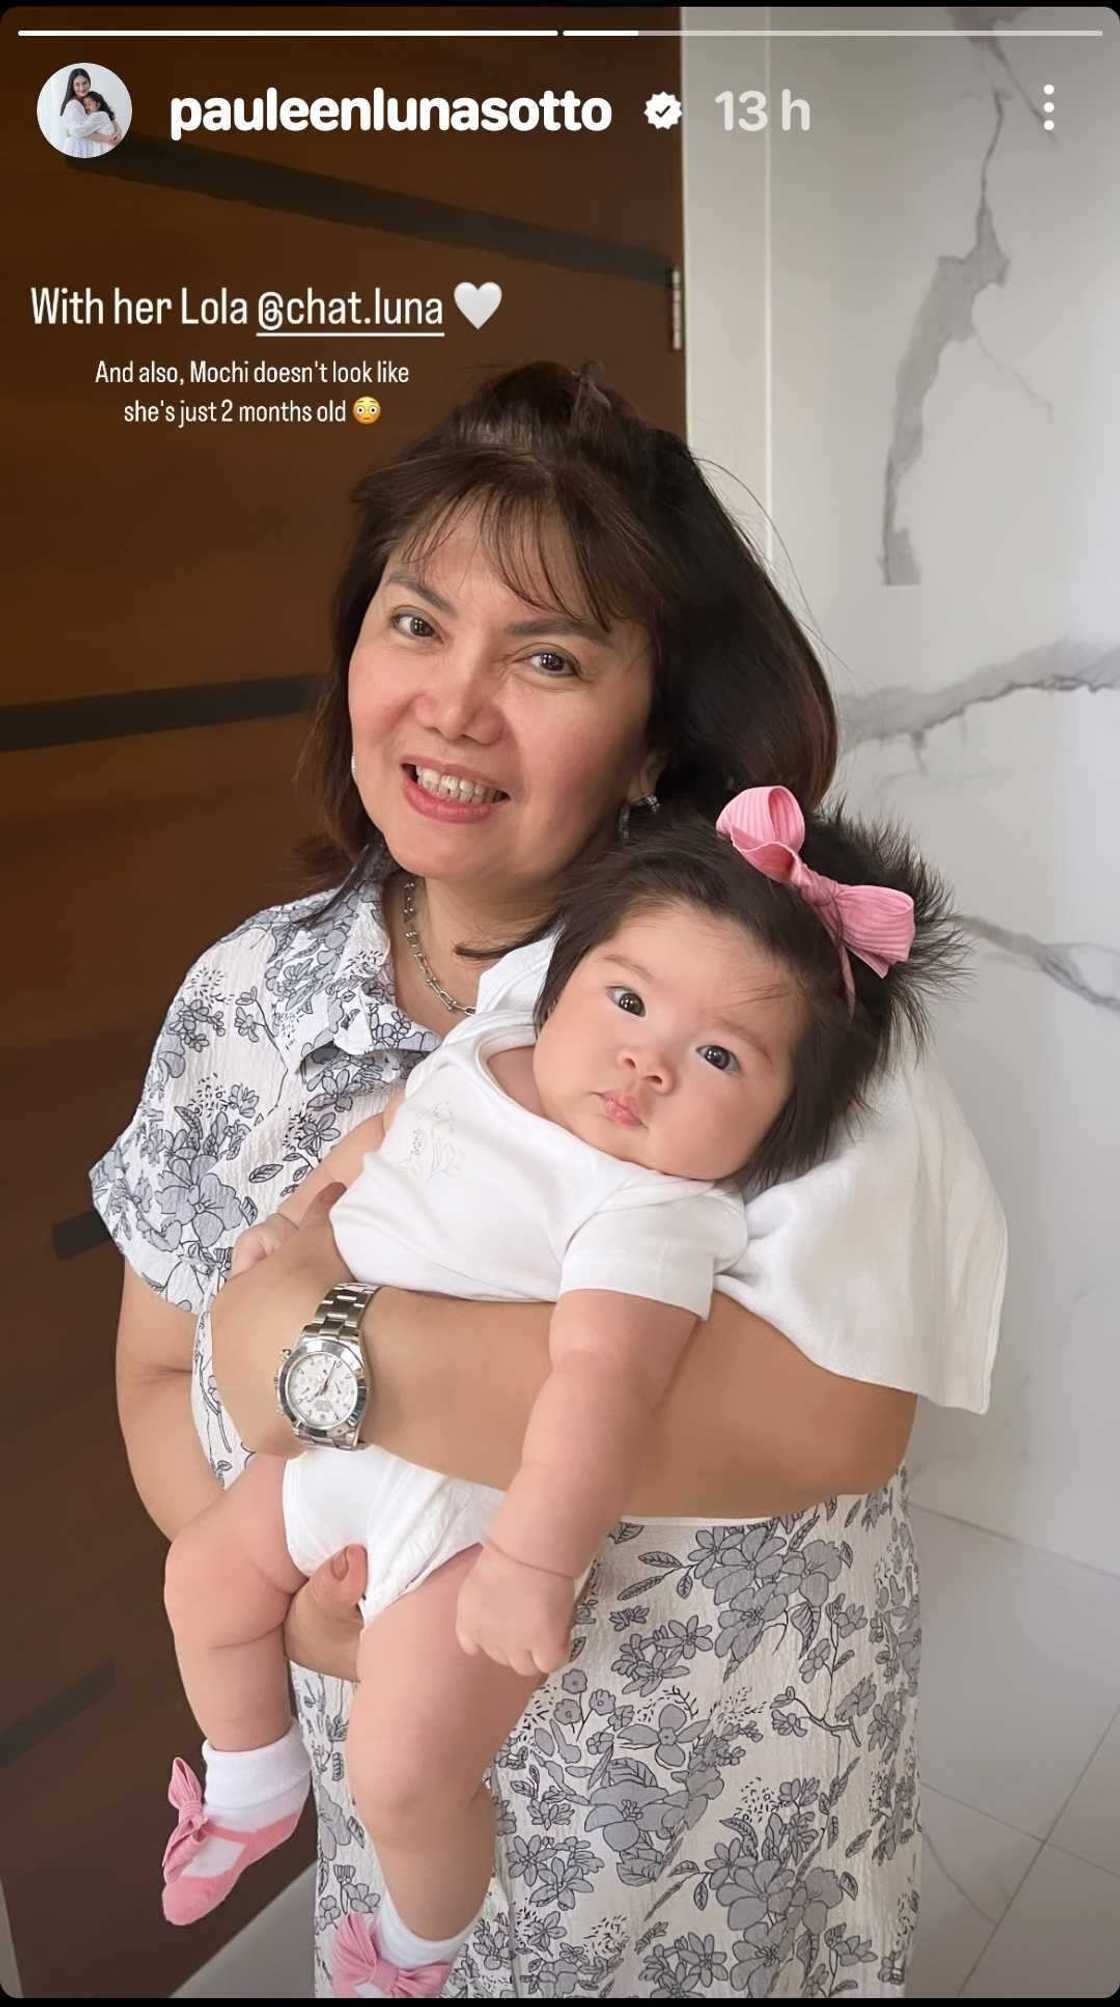 Pauleen Luna shares adorable snap of Baby Mochi with her Lola Chat Luna